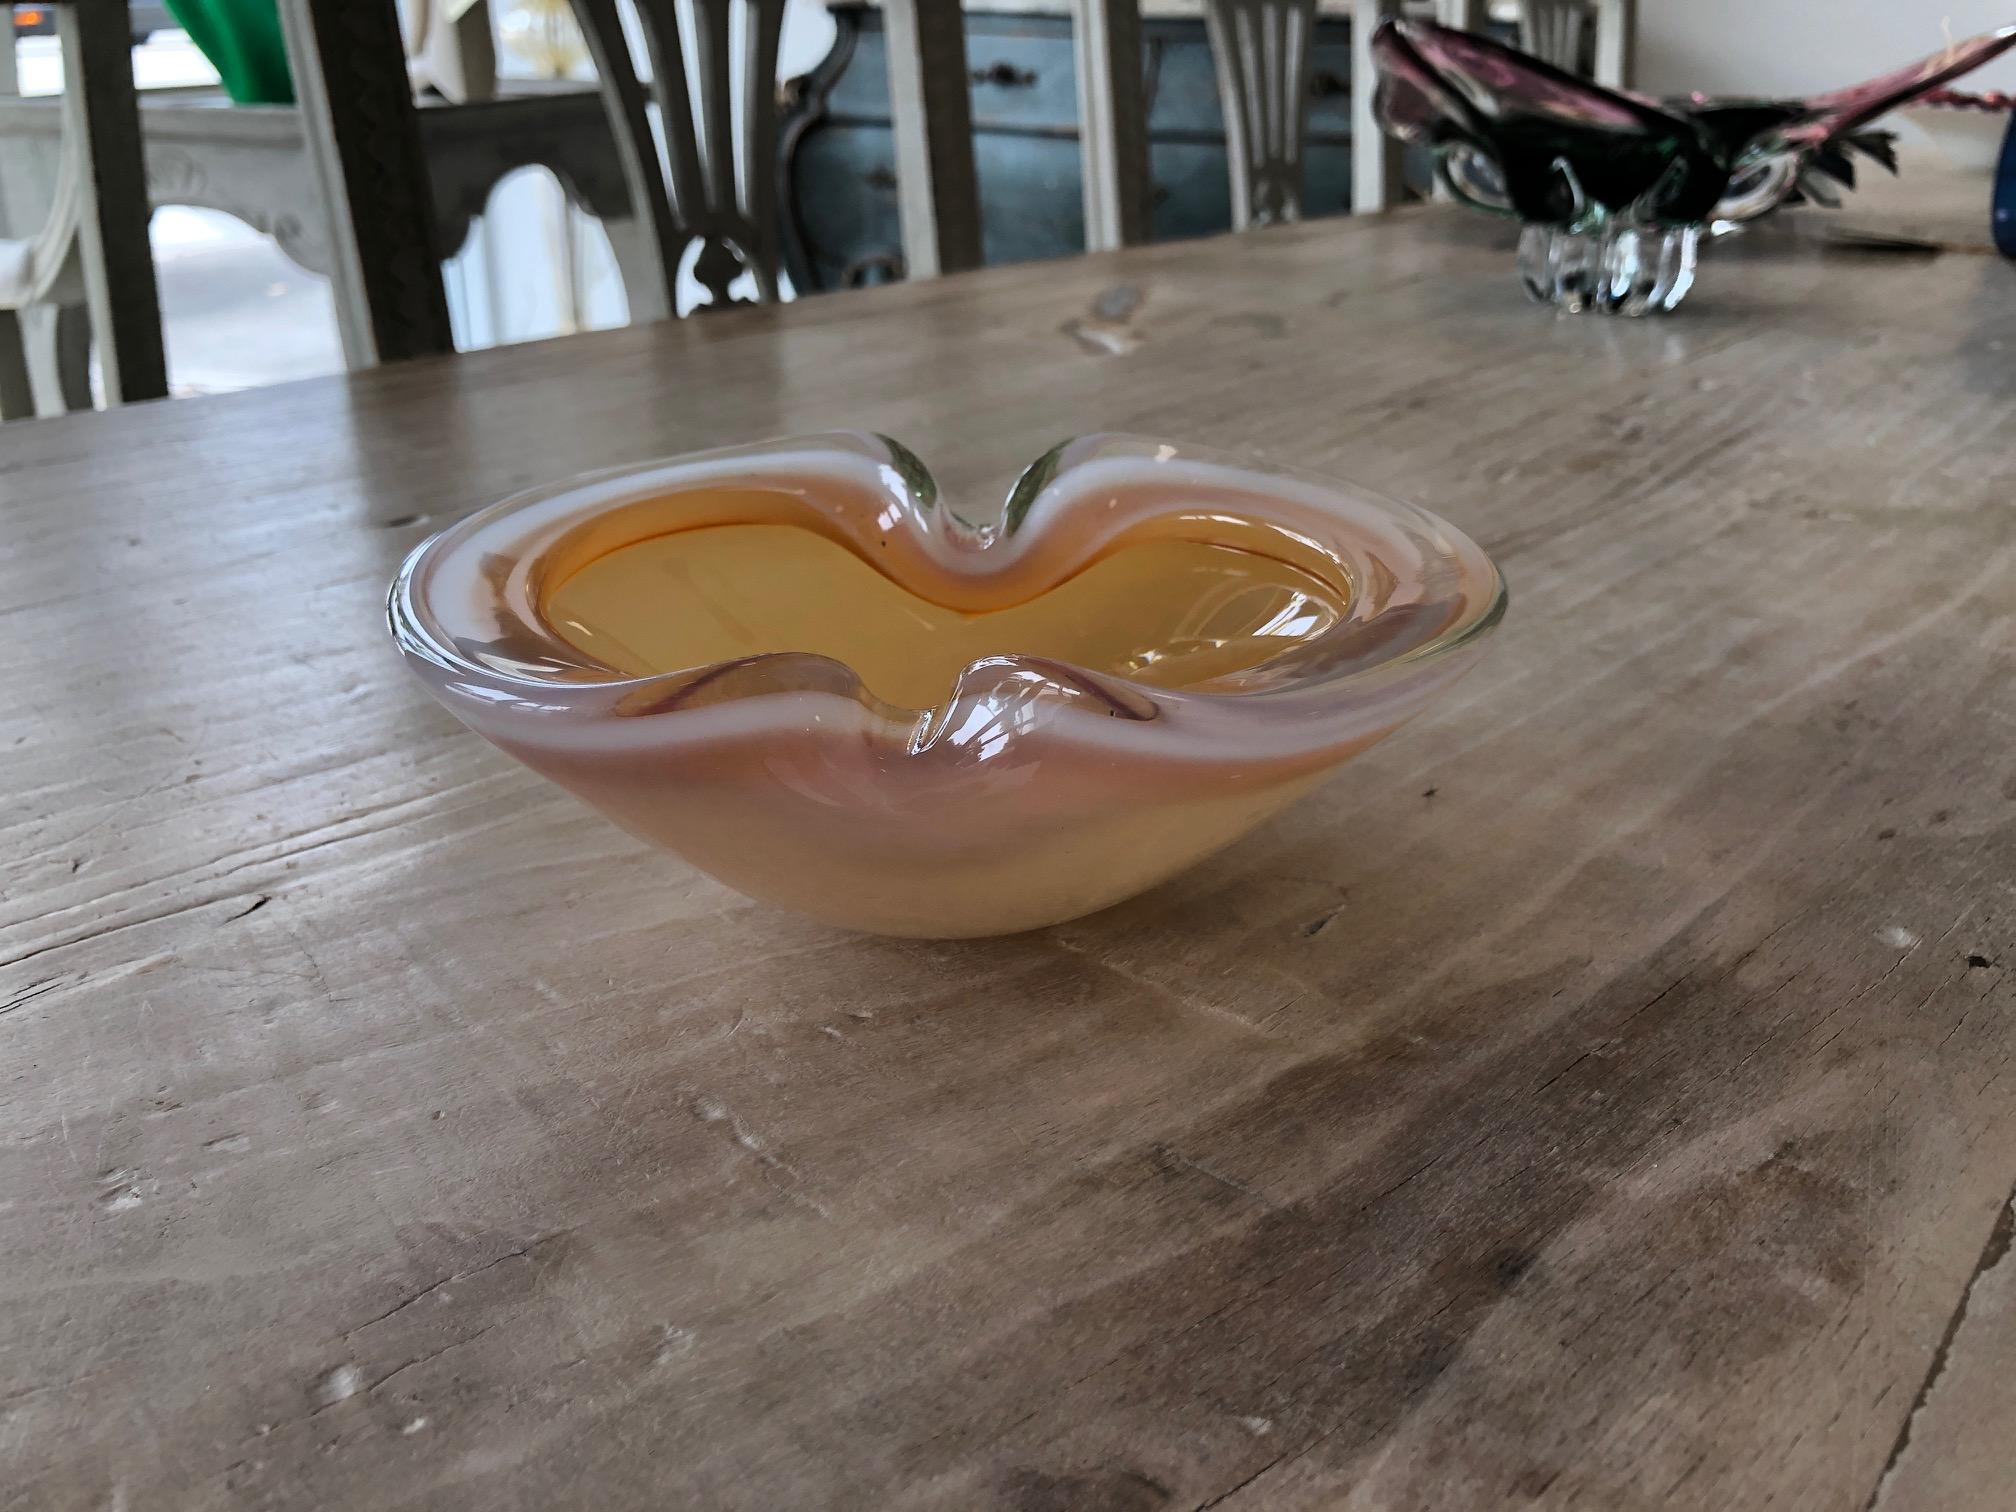 Fratelli Toso 1960s Organic Form Butterscotch Color Bowl In Excellent Condition For Sale In West Palm Beach, FL